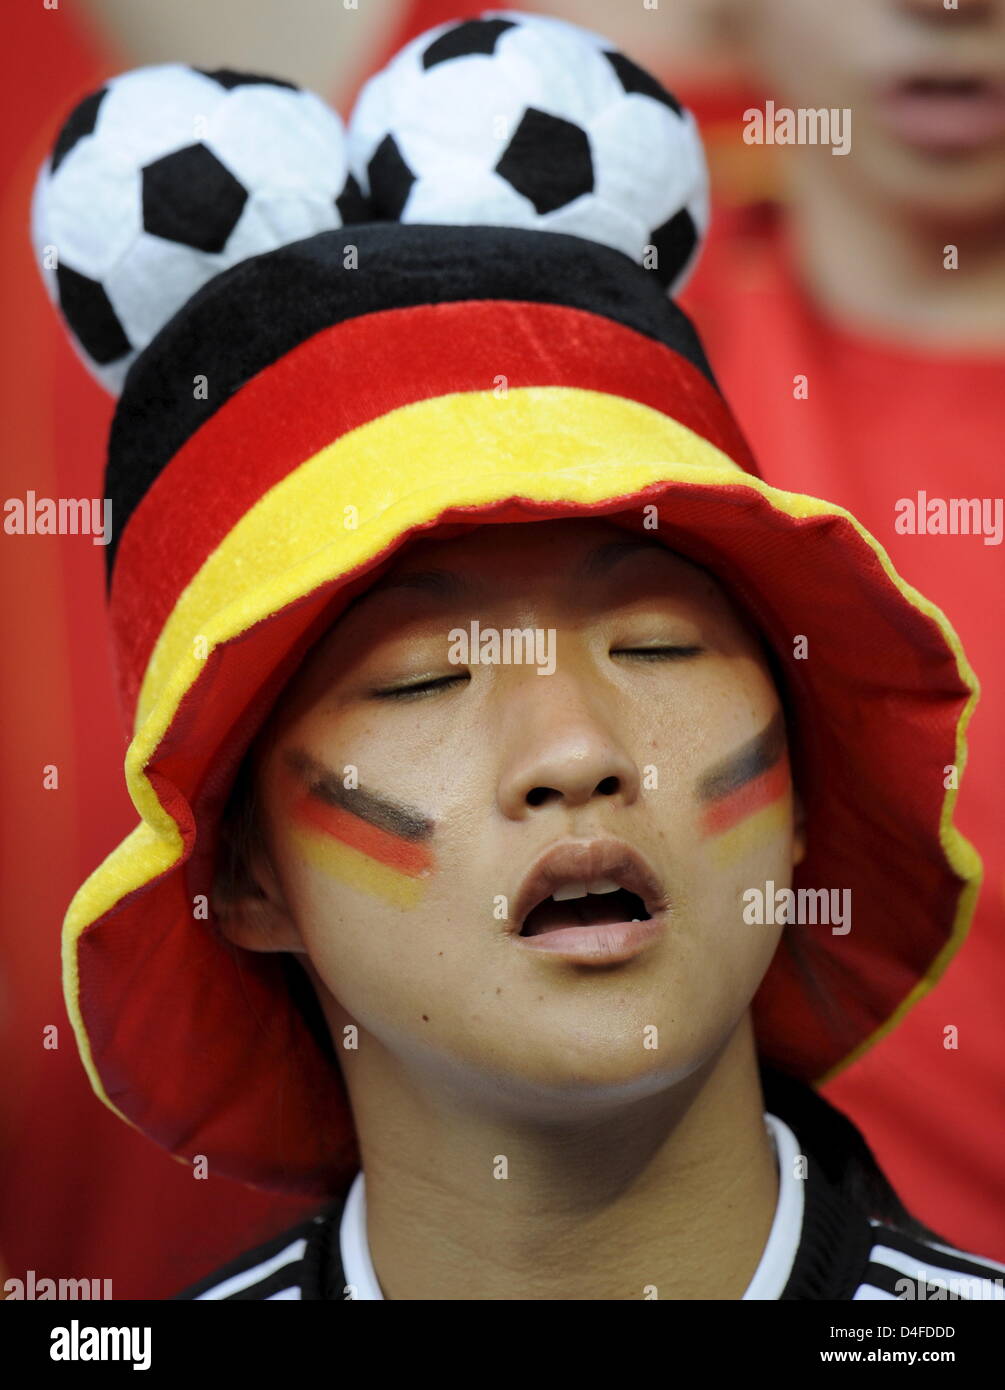 A fan of the German soccer team watches the UEFA EURO 2008 final match between Germany and Spain at the Ernst Happel stadium in Vienna, Austria, 29 June 2008. Photo: Peter Kneffel dpa +++###dpa###+++ Stock Photo